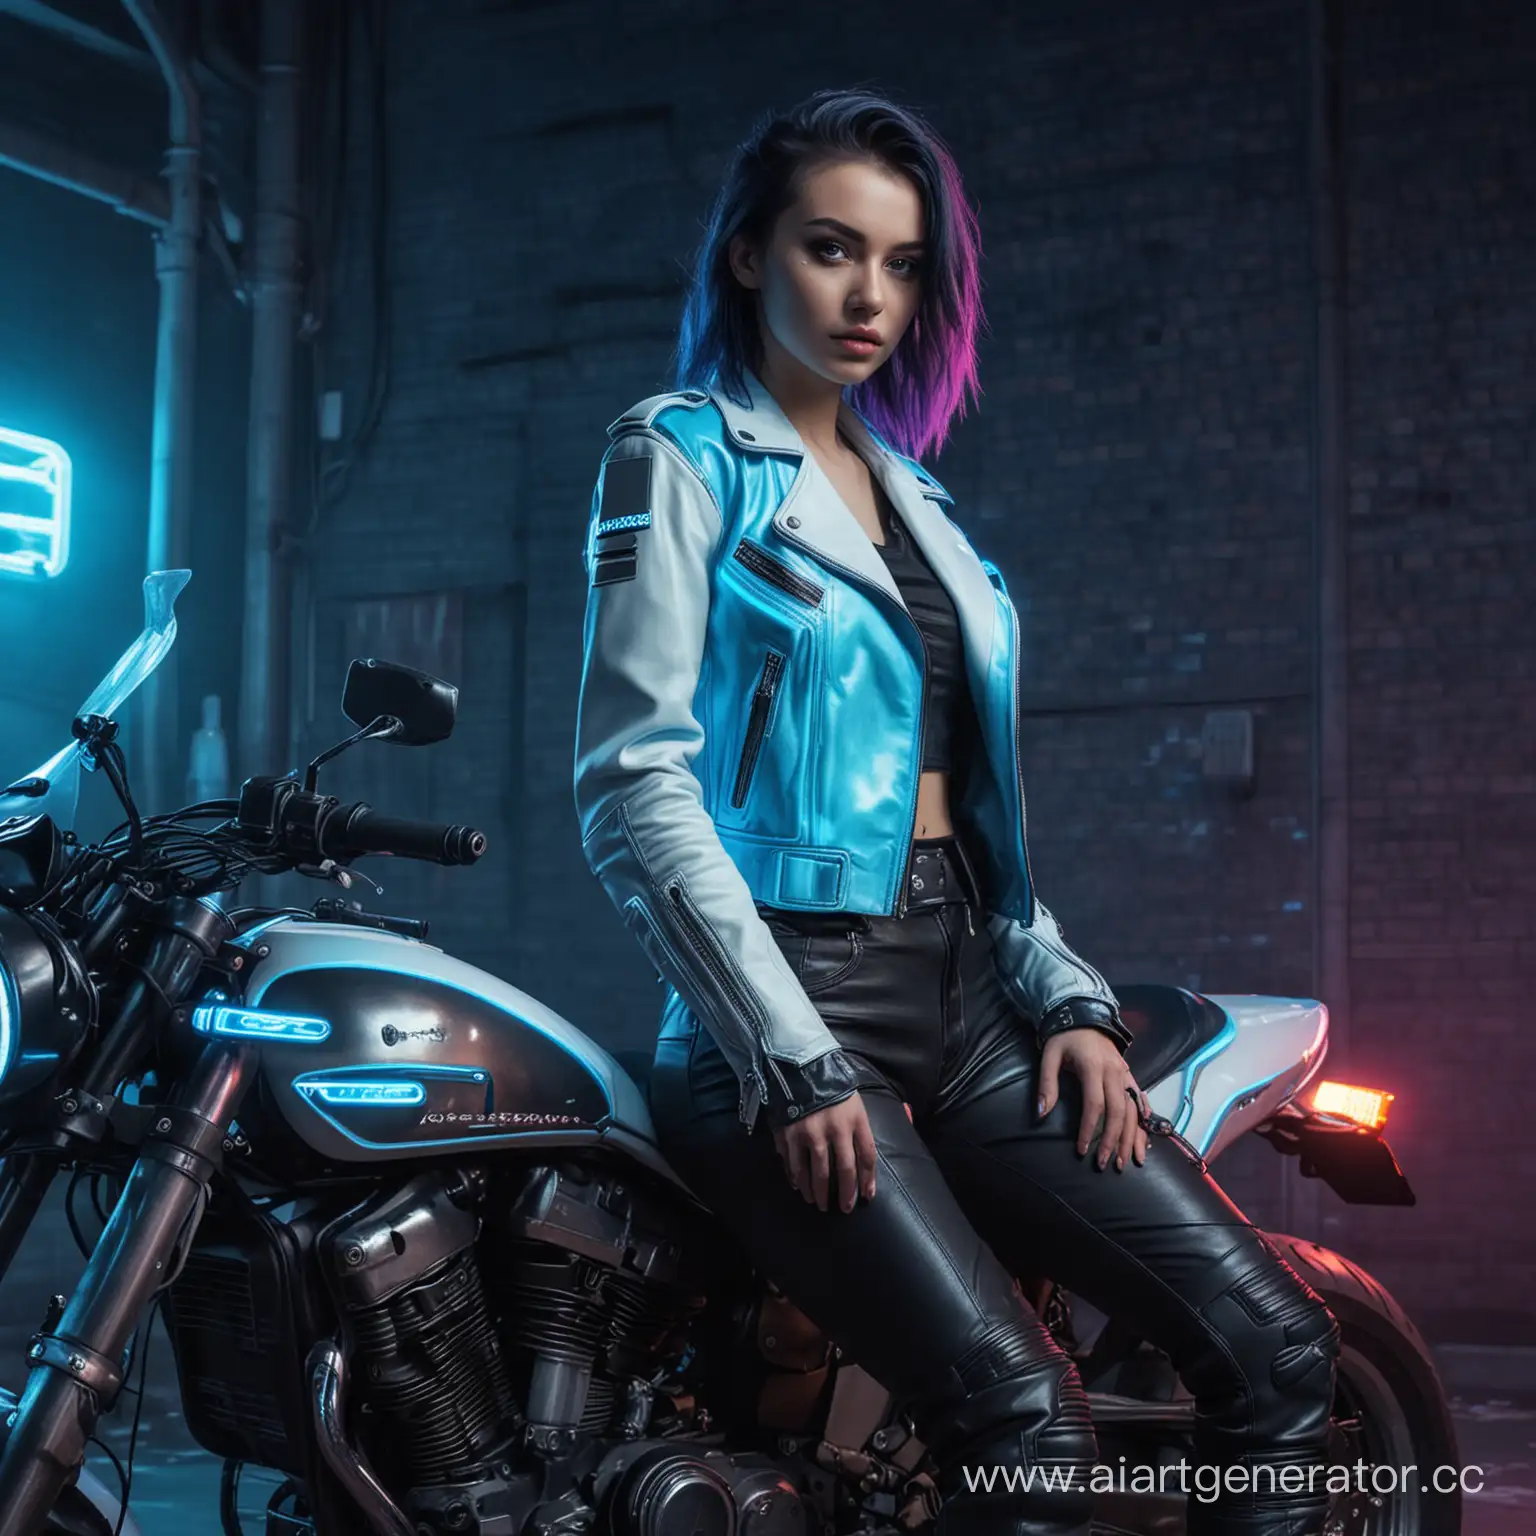 Cyberpunk-Girl-Riding-Motorcycle-in-Neon-Blue-Ambiance